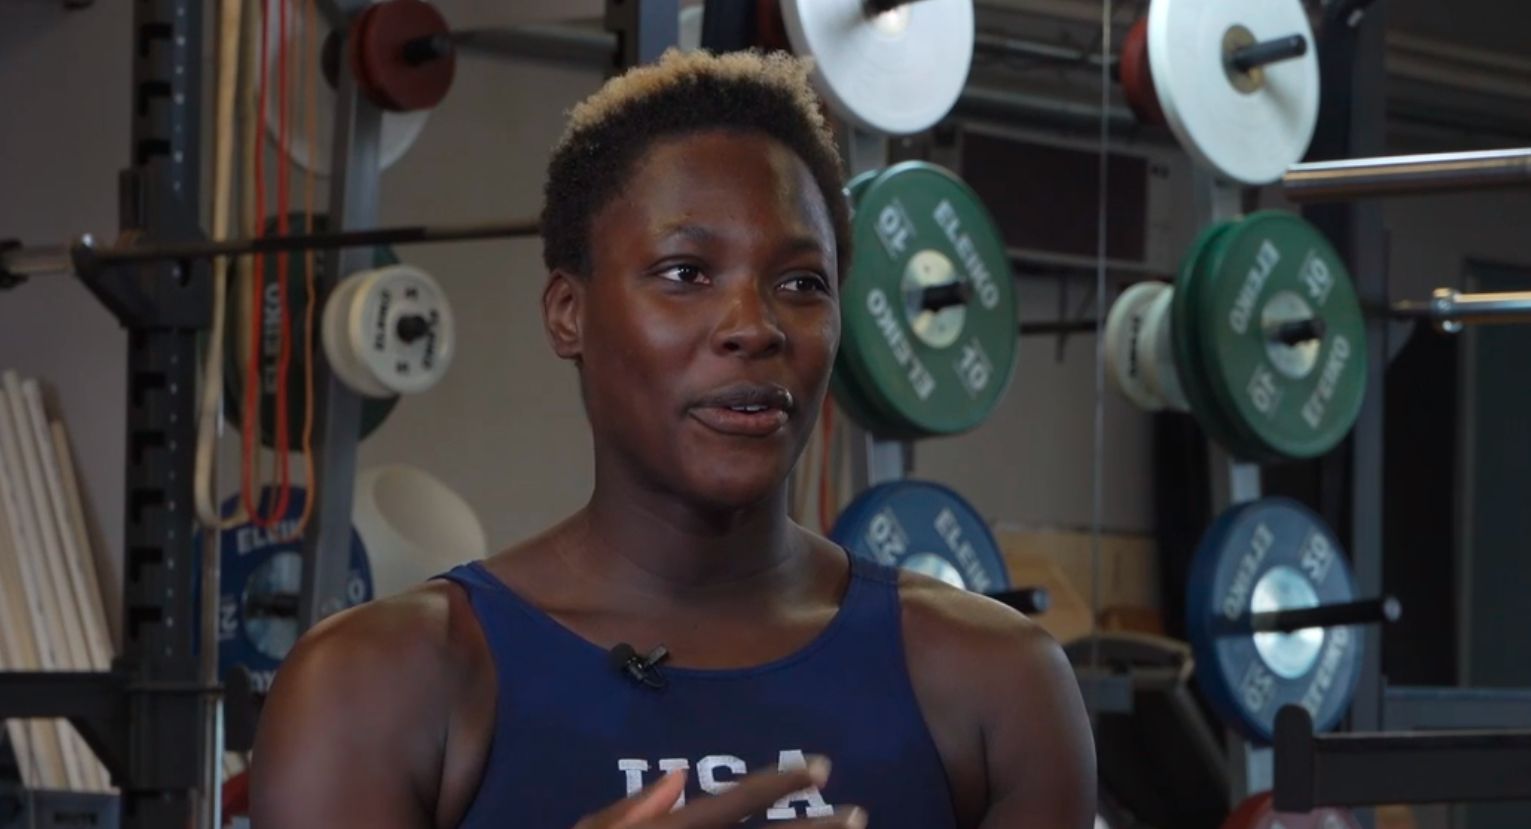 2016 gold medalist Ashleigh Johnson talks about what it took to become first African American on U.S. Olympic women's water polo team. SPORTSPULSE, USA TODAY